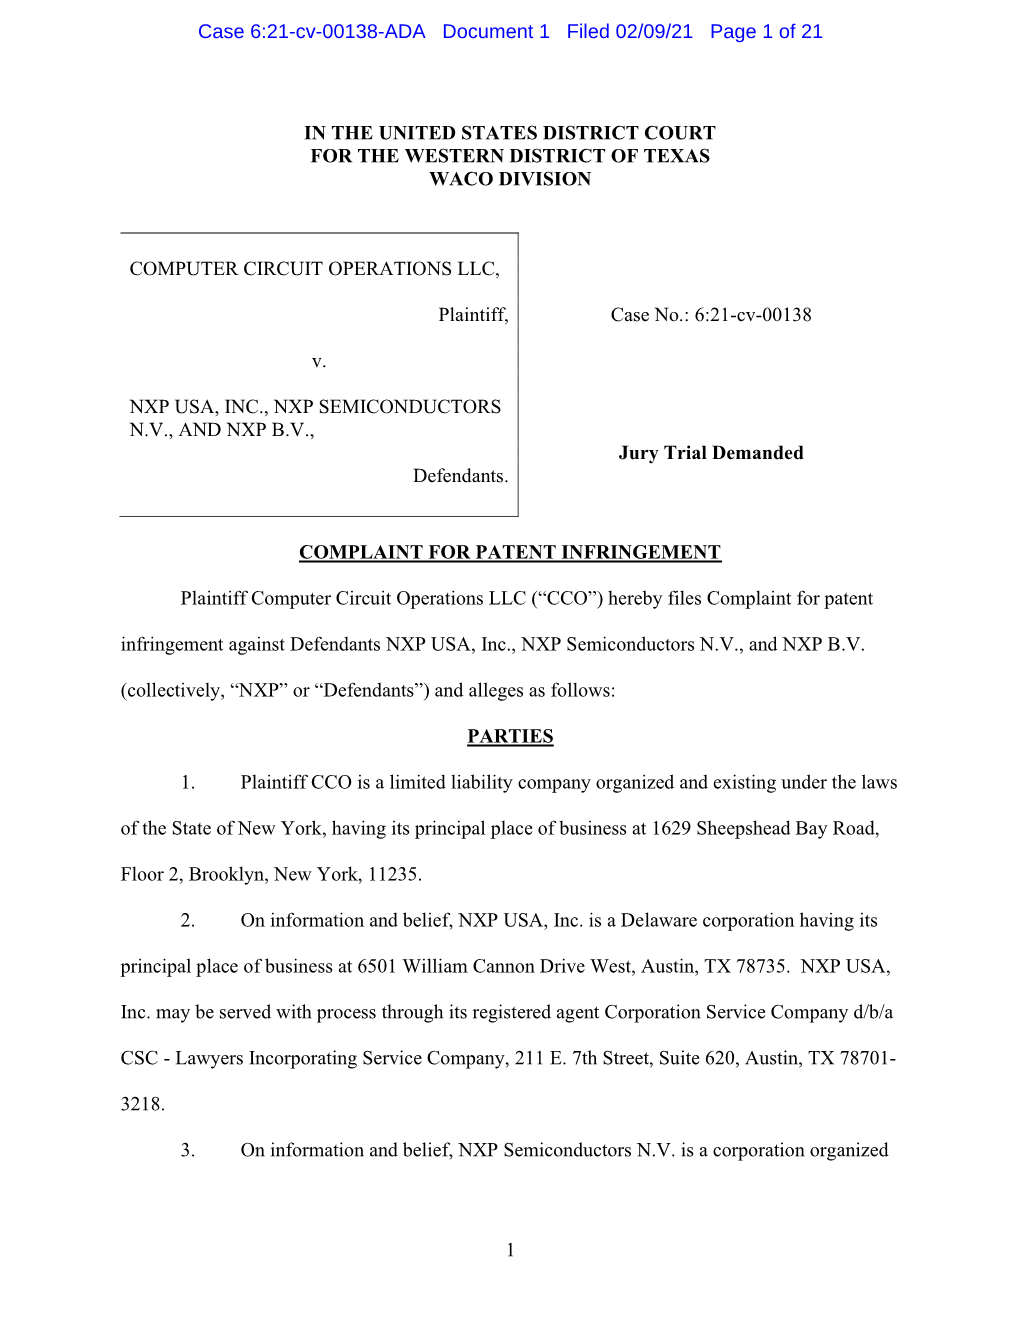 Case 6:21-Cv-00138-ADA Document 1 Filed 02/09/21 Page 1 of 21